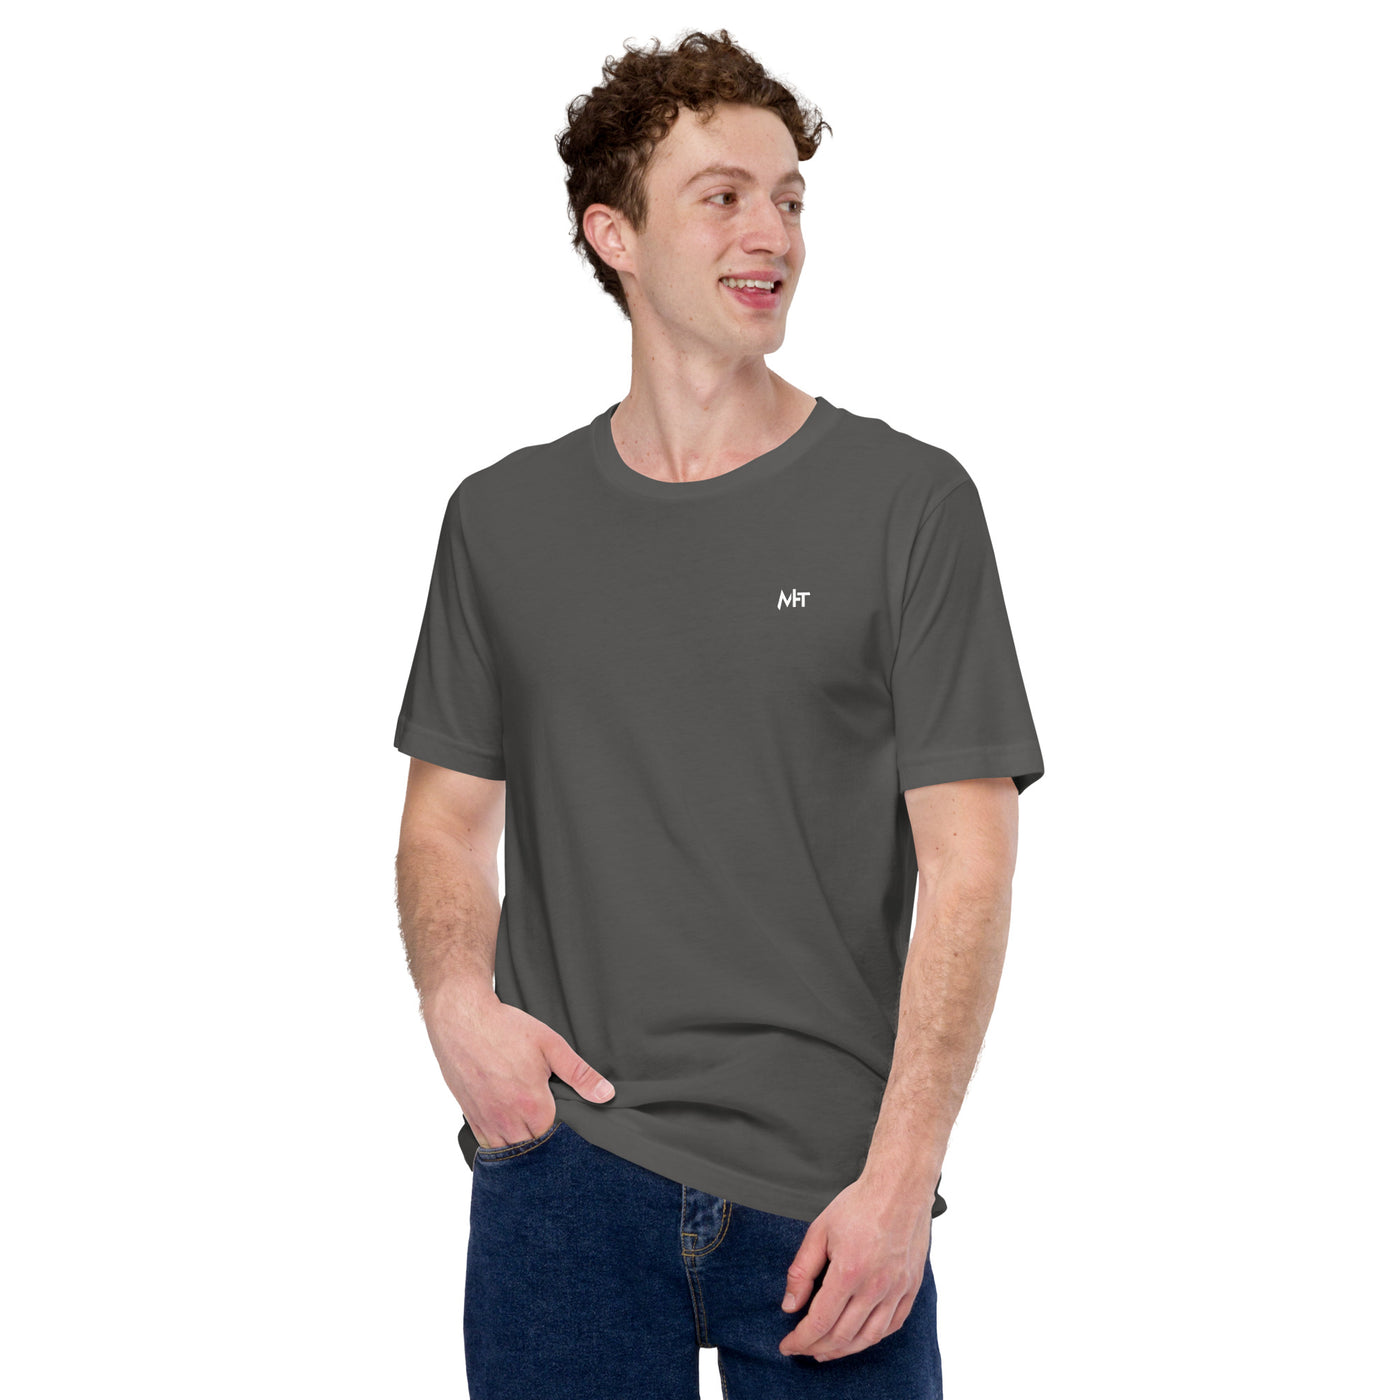 Life has its ups and downs; I call it Day Trading - Unisex t-shirt ( Back Print )